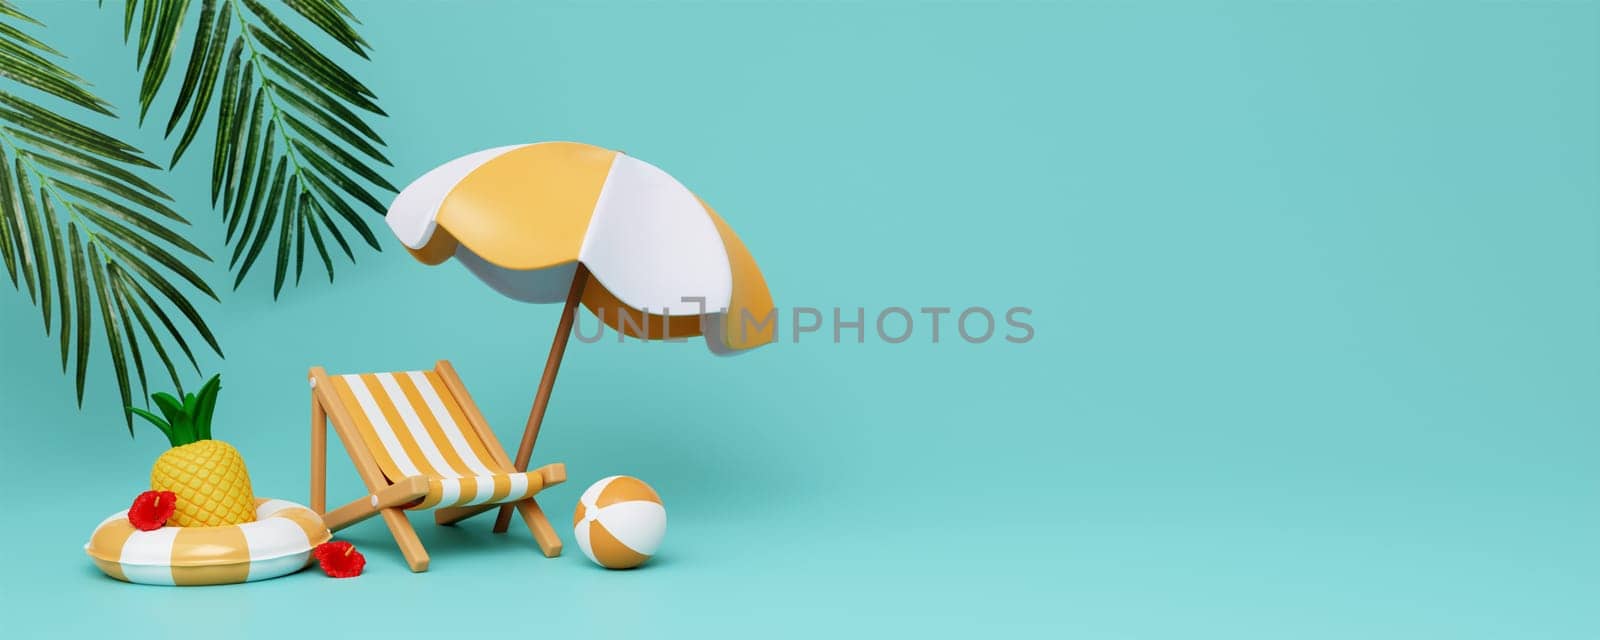 Beach Chair, Umbrella and swimming ring , Summer holiday, Time to travel concept. Creative travel concept idea with copy space. illustration banner 3d rendering illustration.